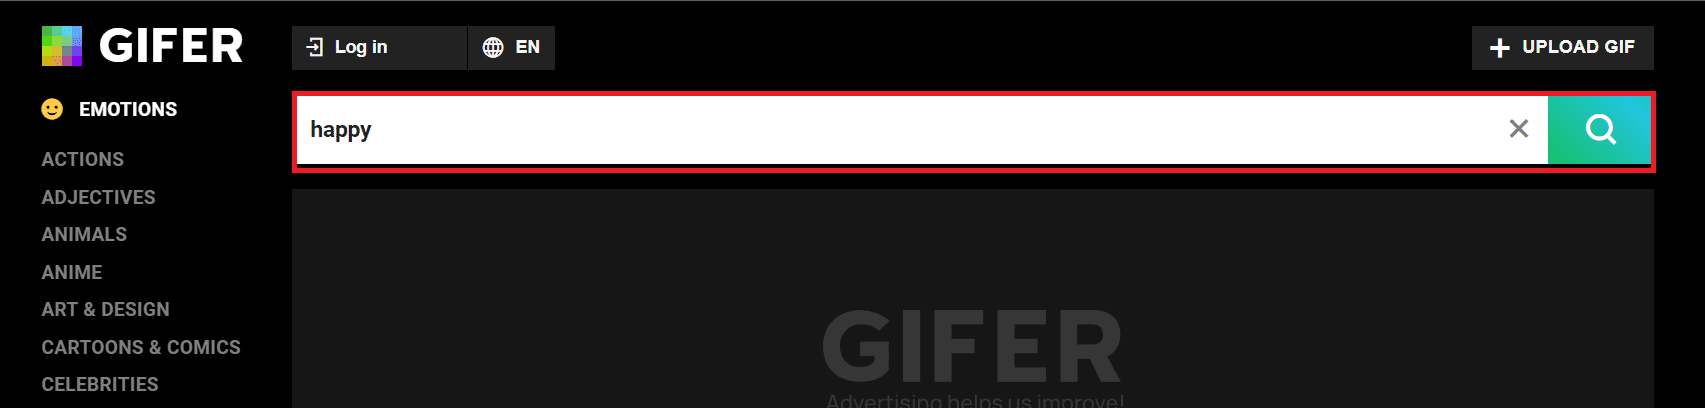 Type your favorite GIFs in the Gifer search bar and hit enter.